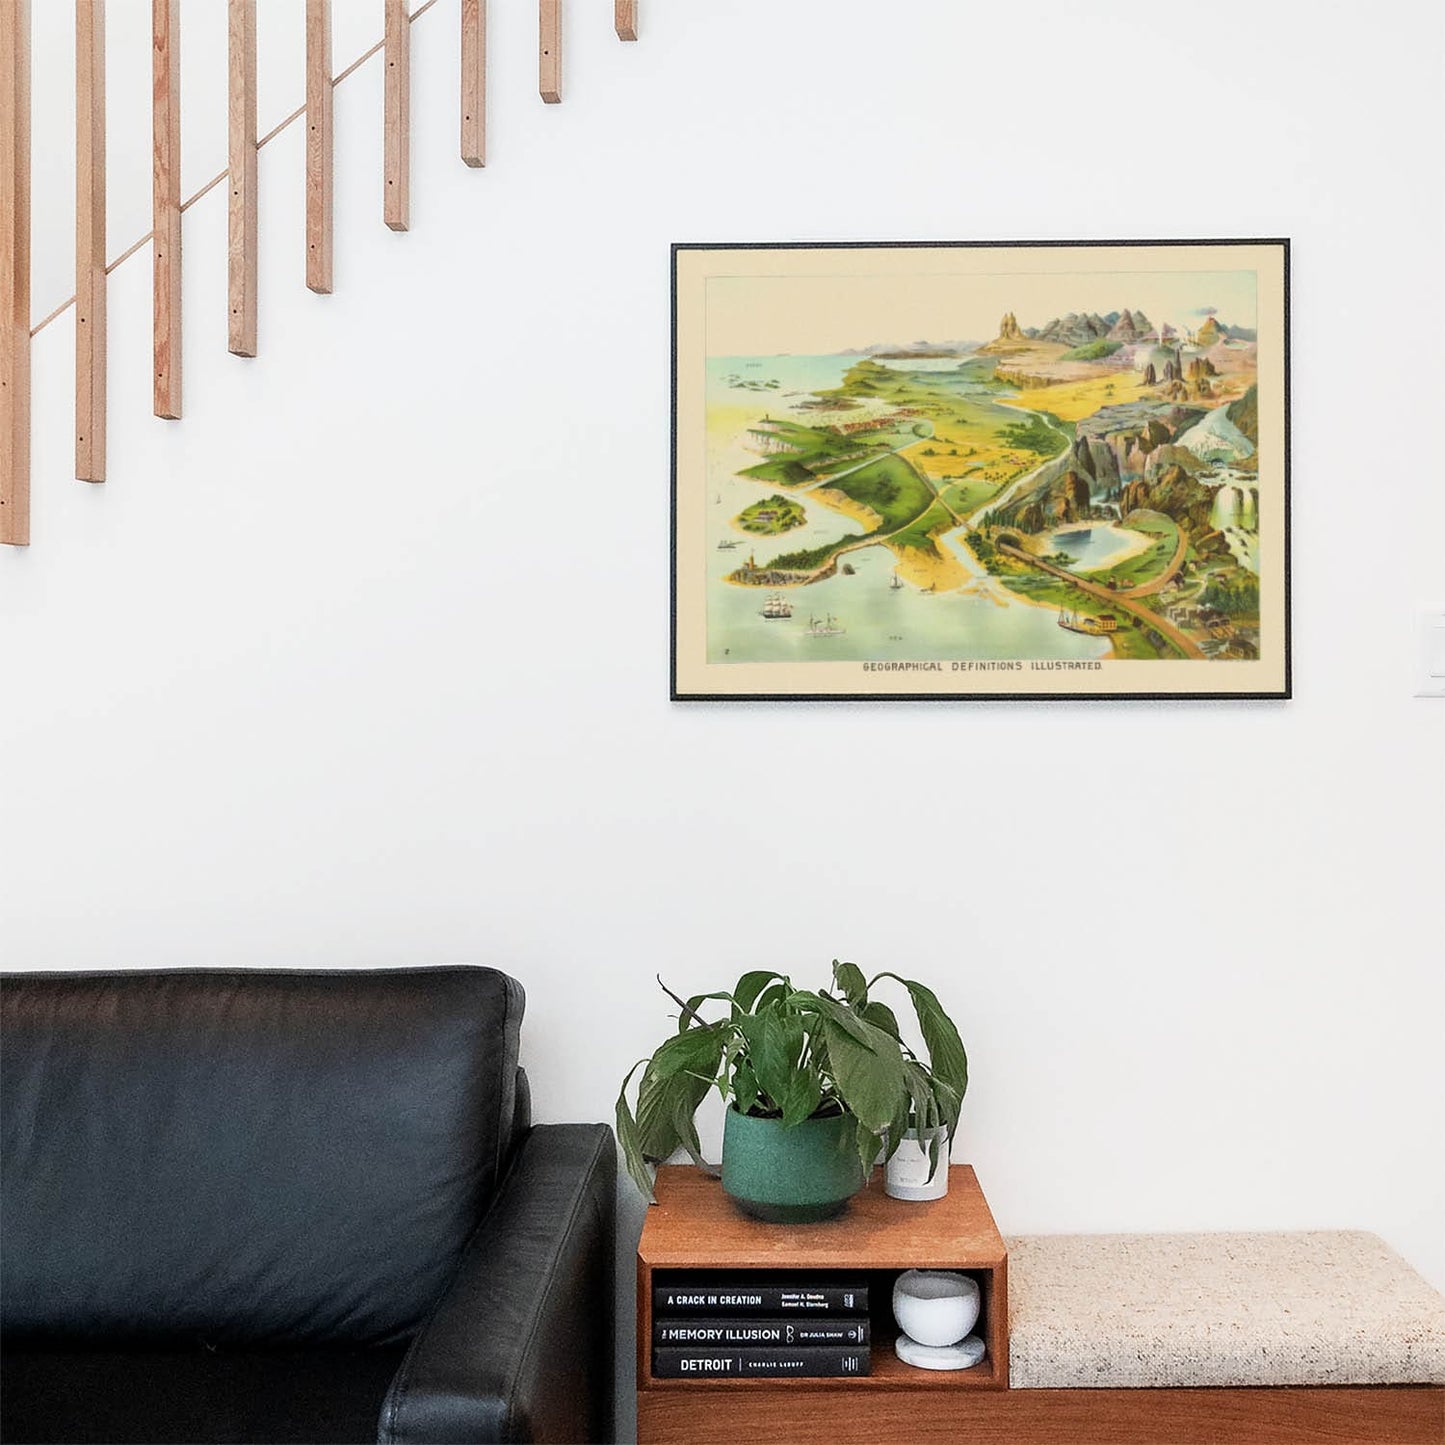 Living space with a black leather couch and table with a plant and books below a staircase featuring a framed picture of Vintage Geography